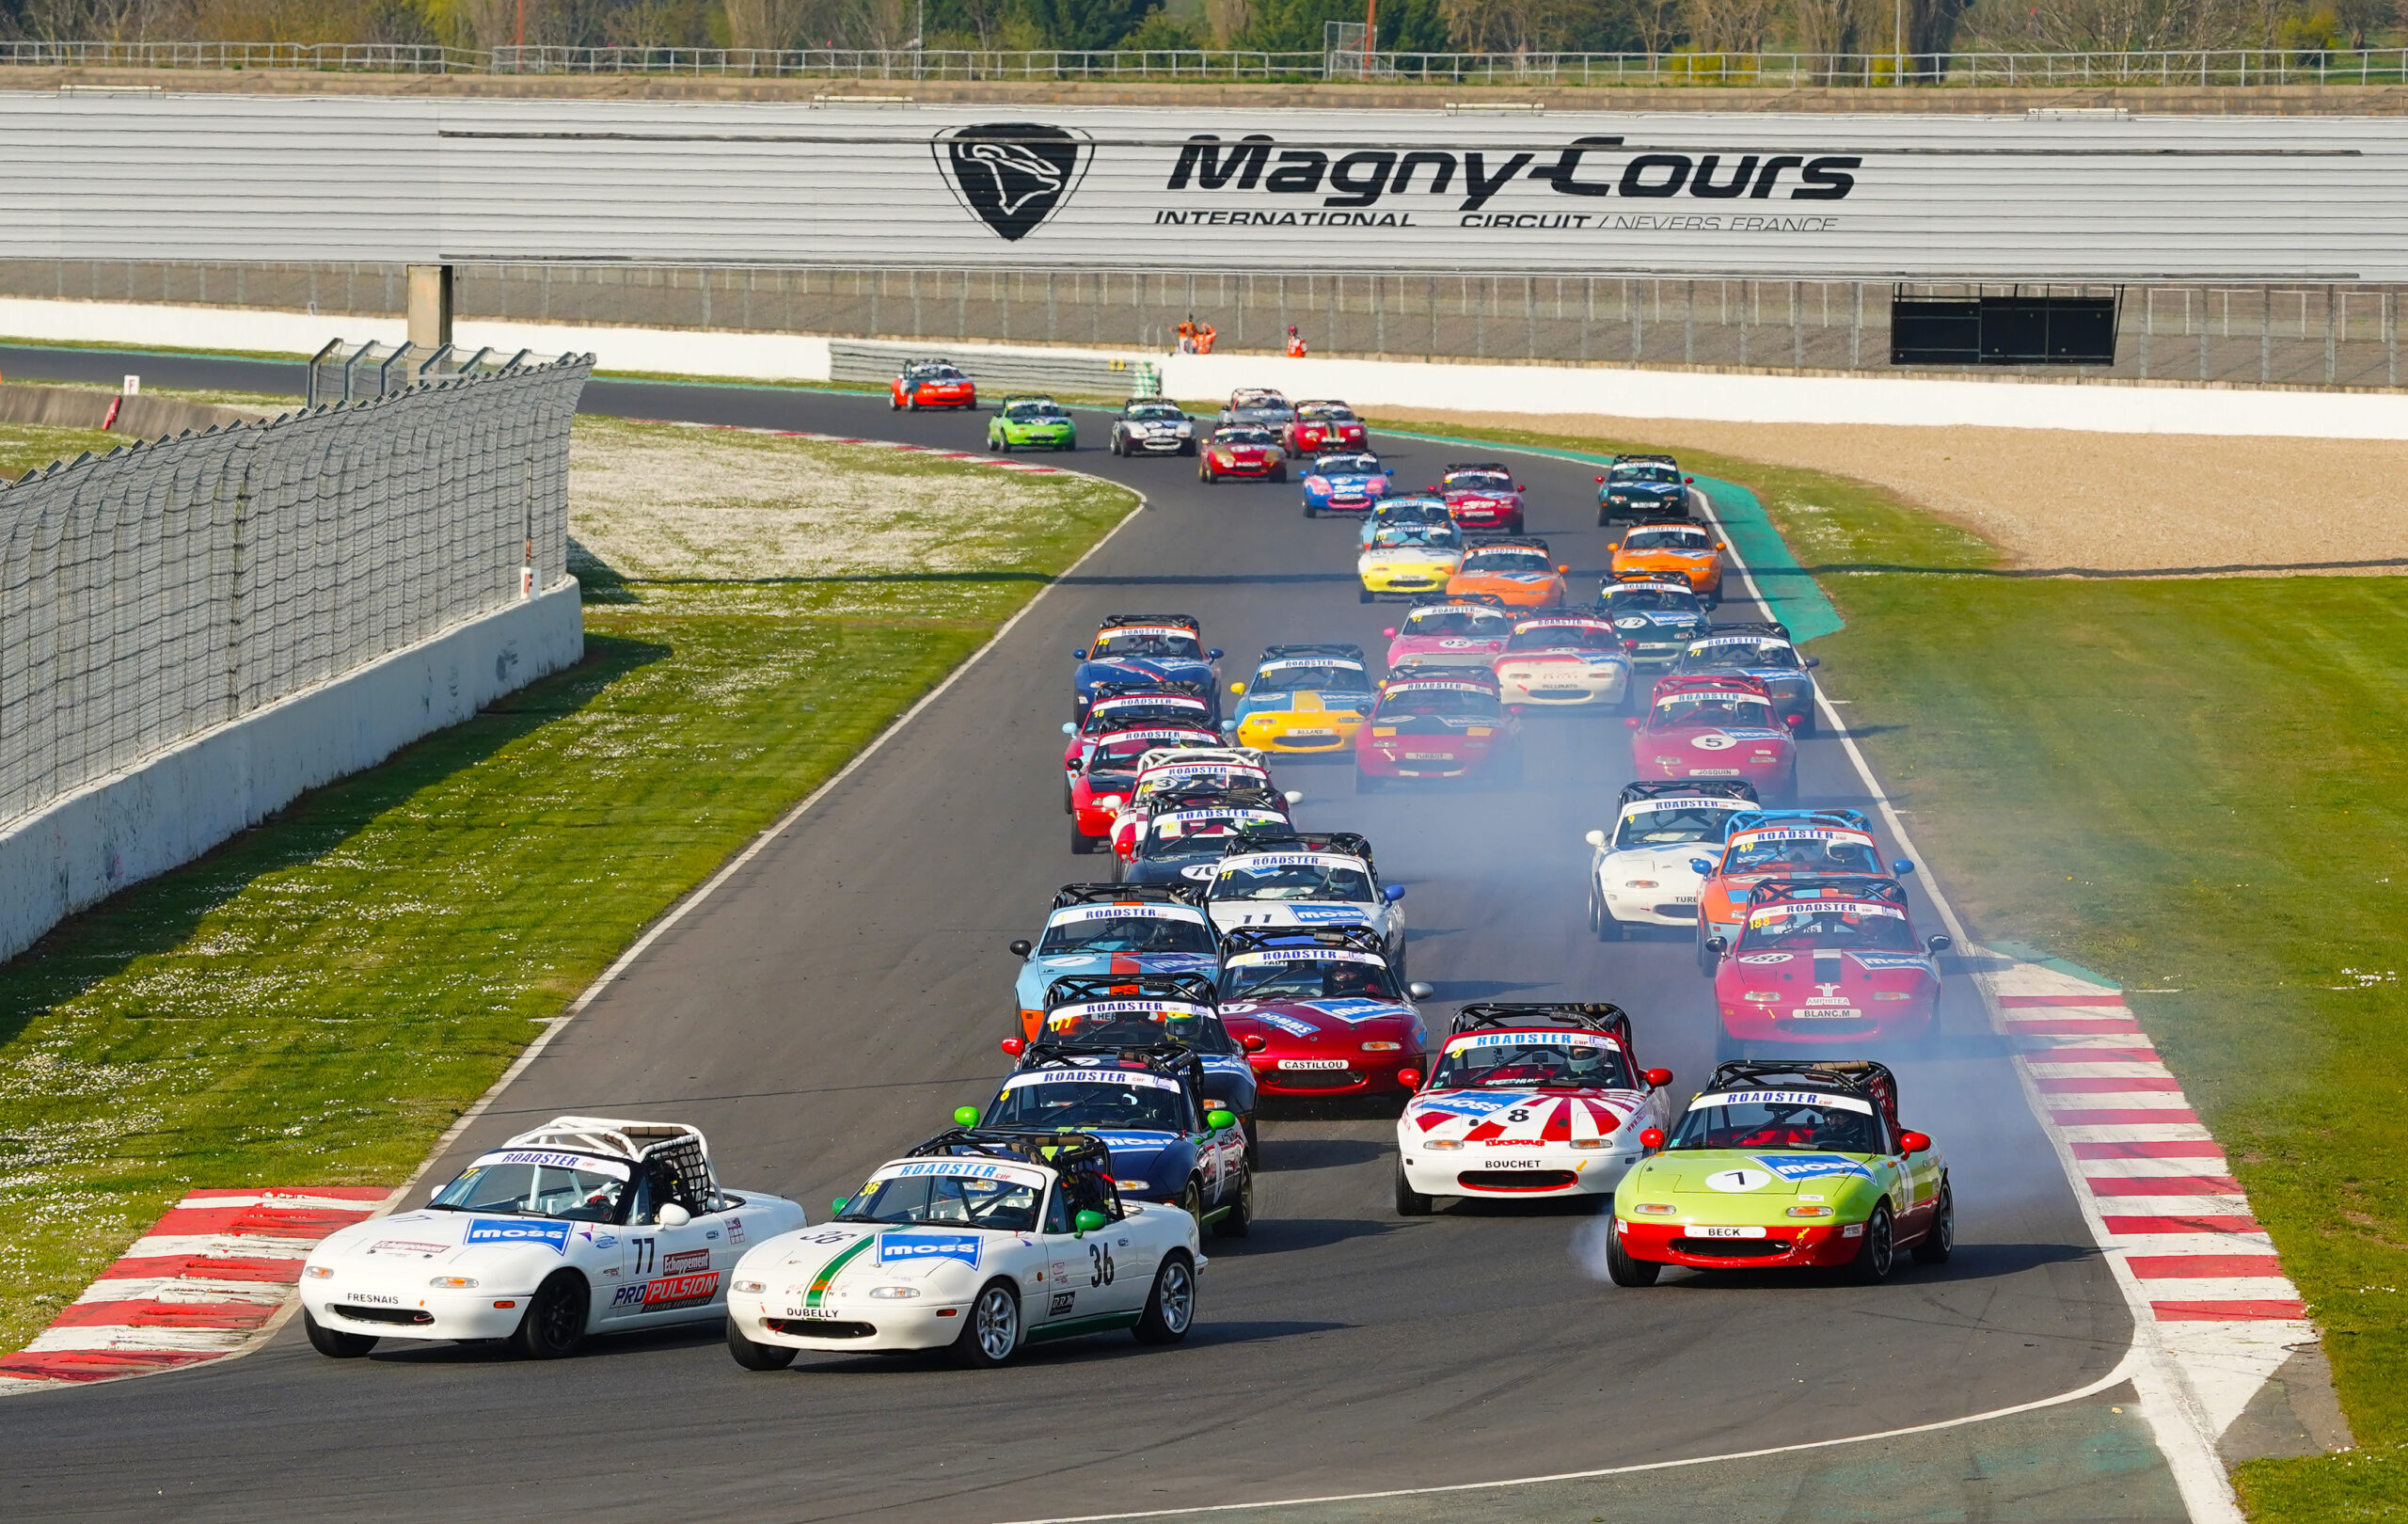 HISTORIC TOUR MAGNY-COURS #2: CONFIRMATION DAY